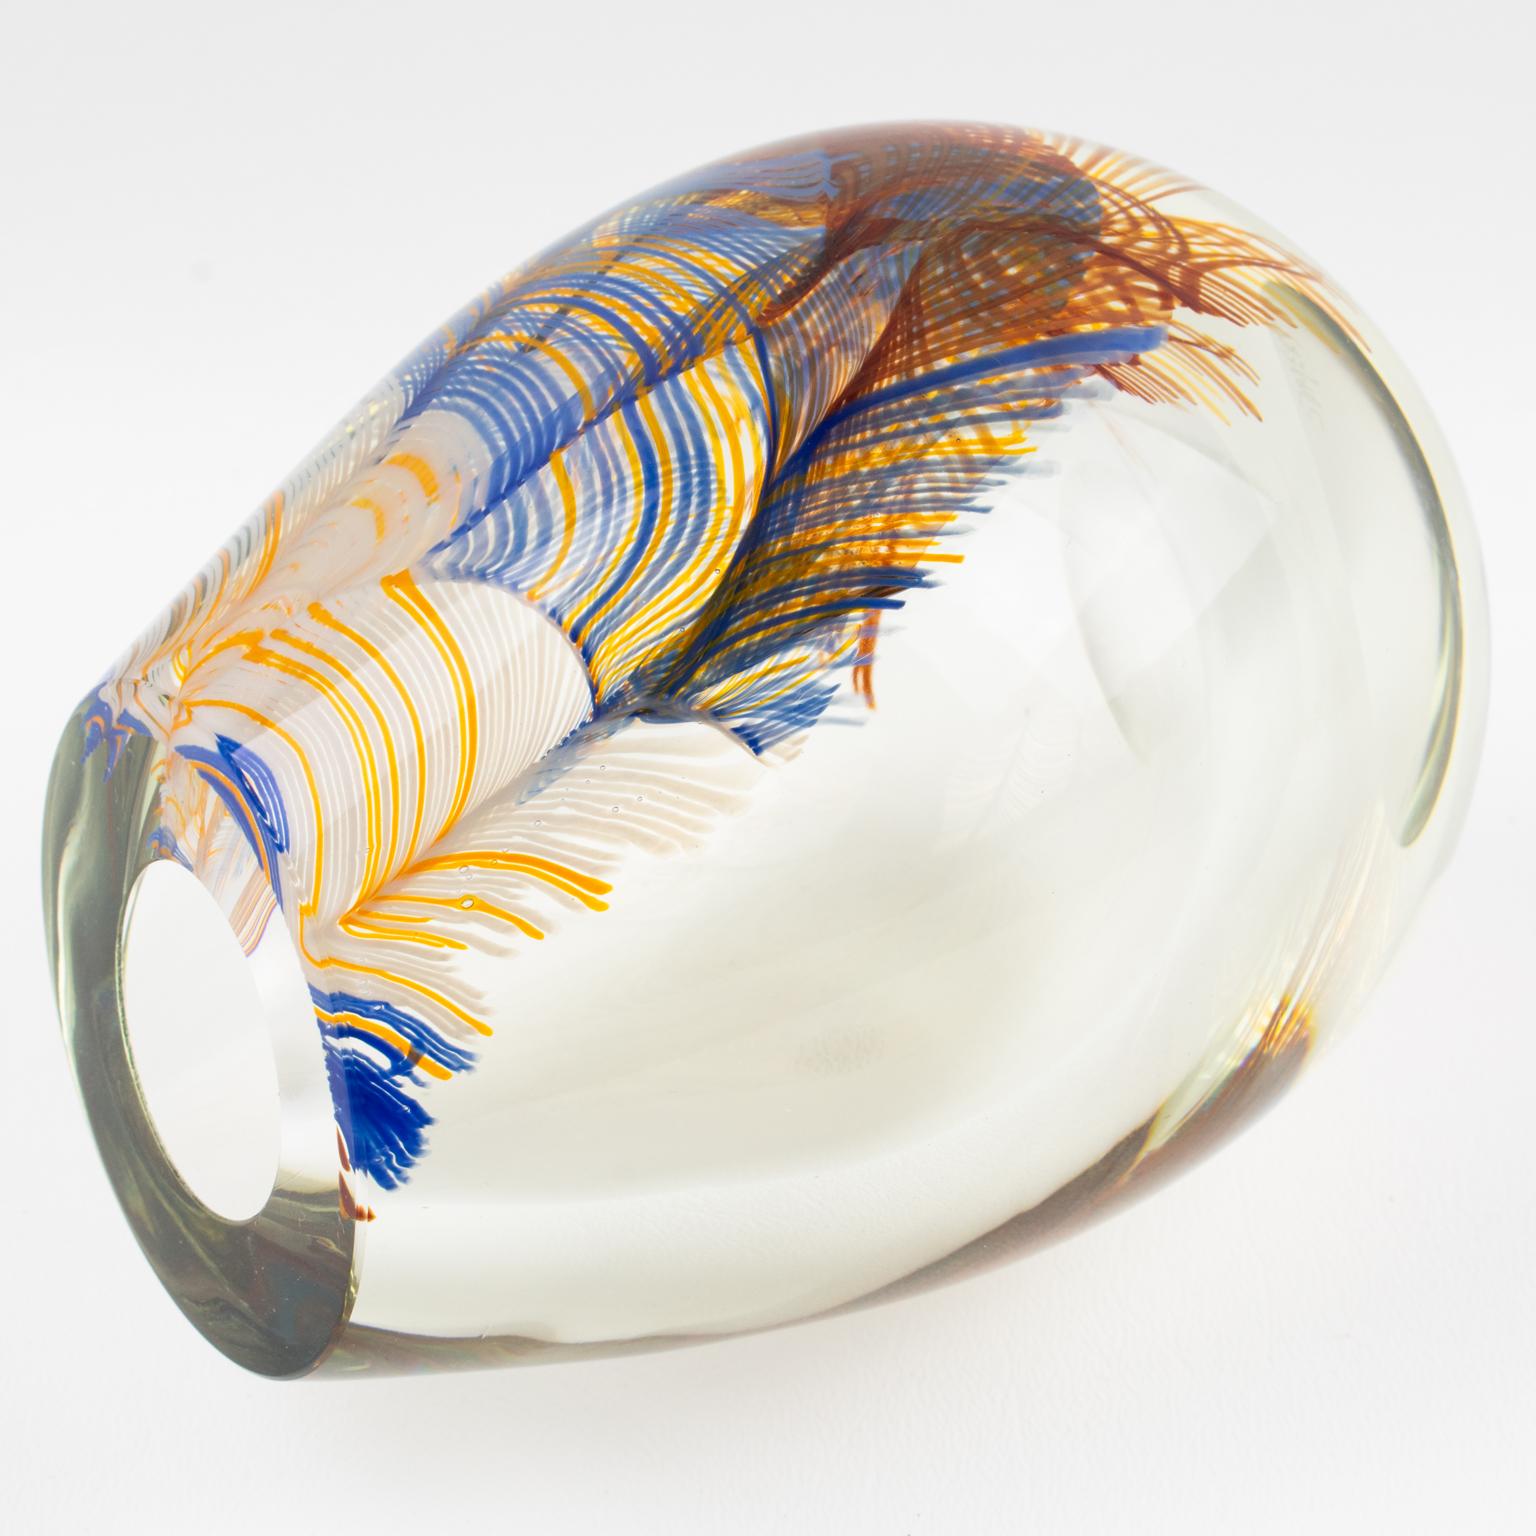 Stephen Smyers Modern Blown Art Glass Vase Abstract Feather Design, 1979 For Sale 4